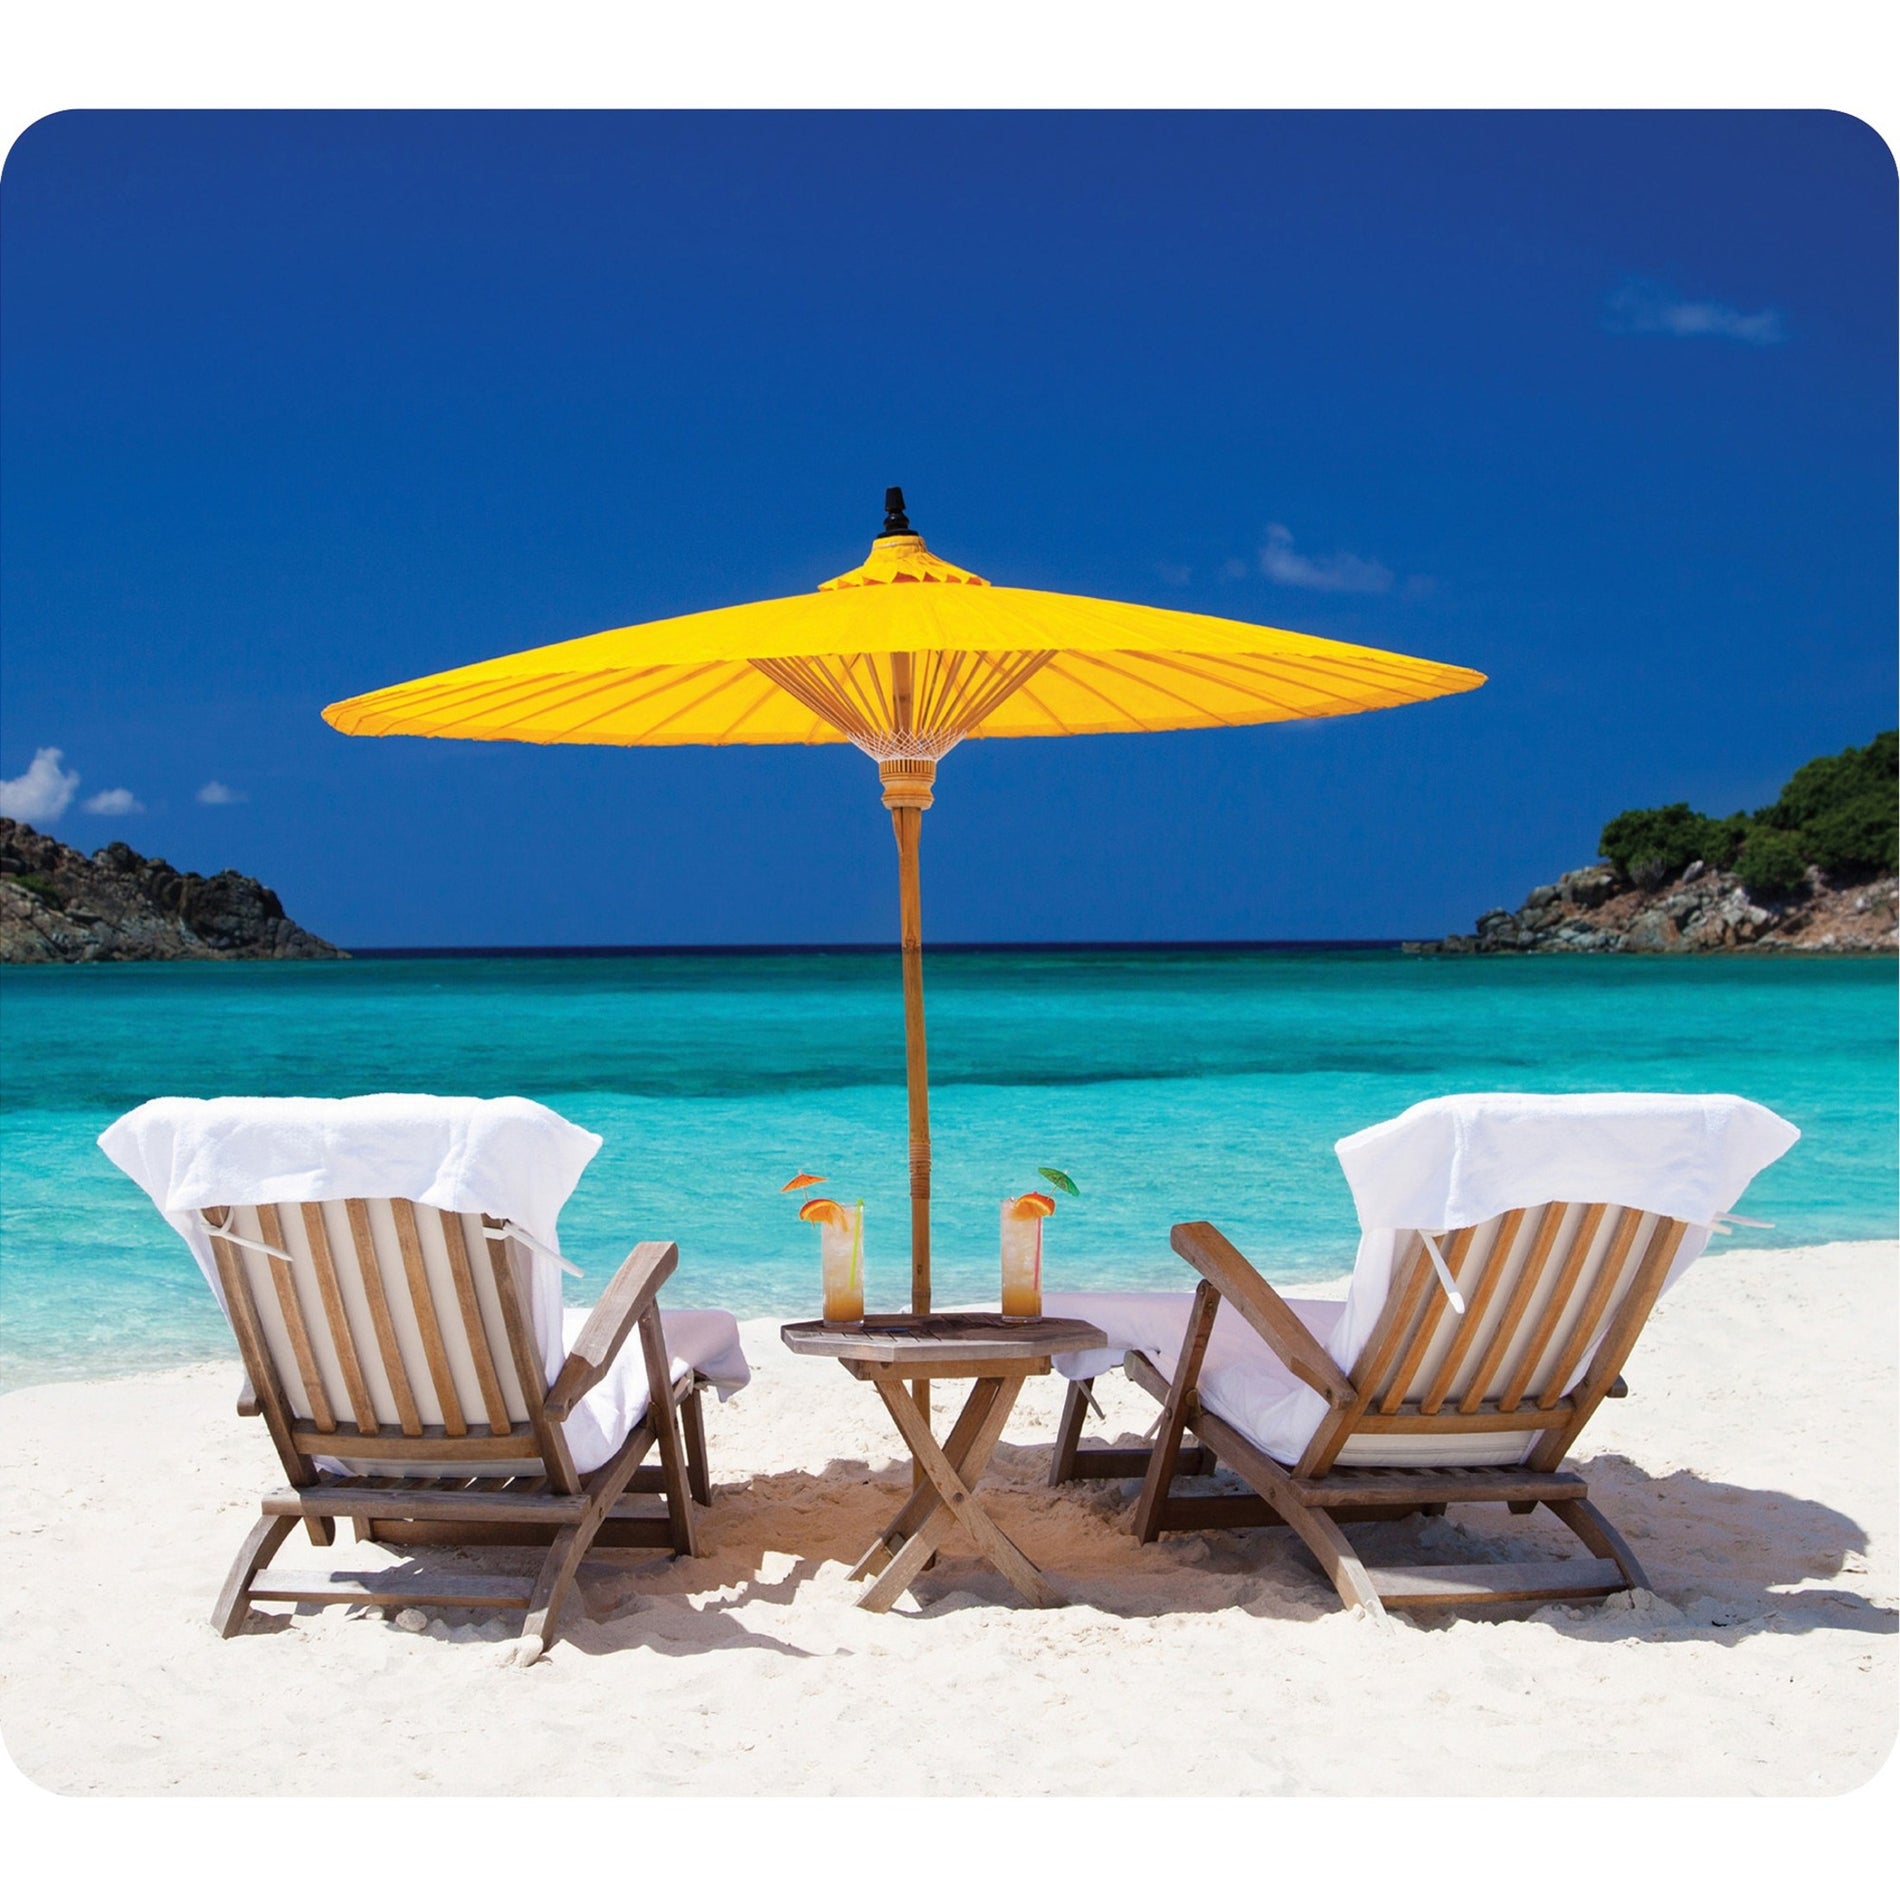 Fellowes 5916301 Recycled Mouse Pad - Caribbean Beach, Non-skid Base, Easy to Clean, Durable